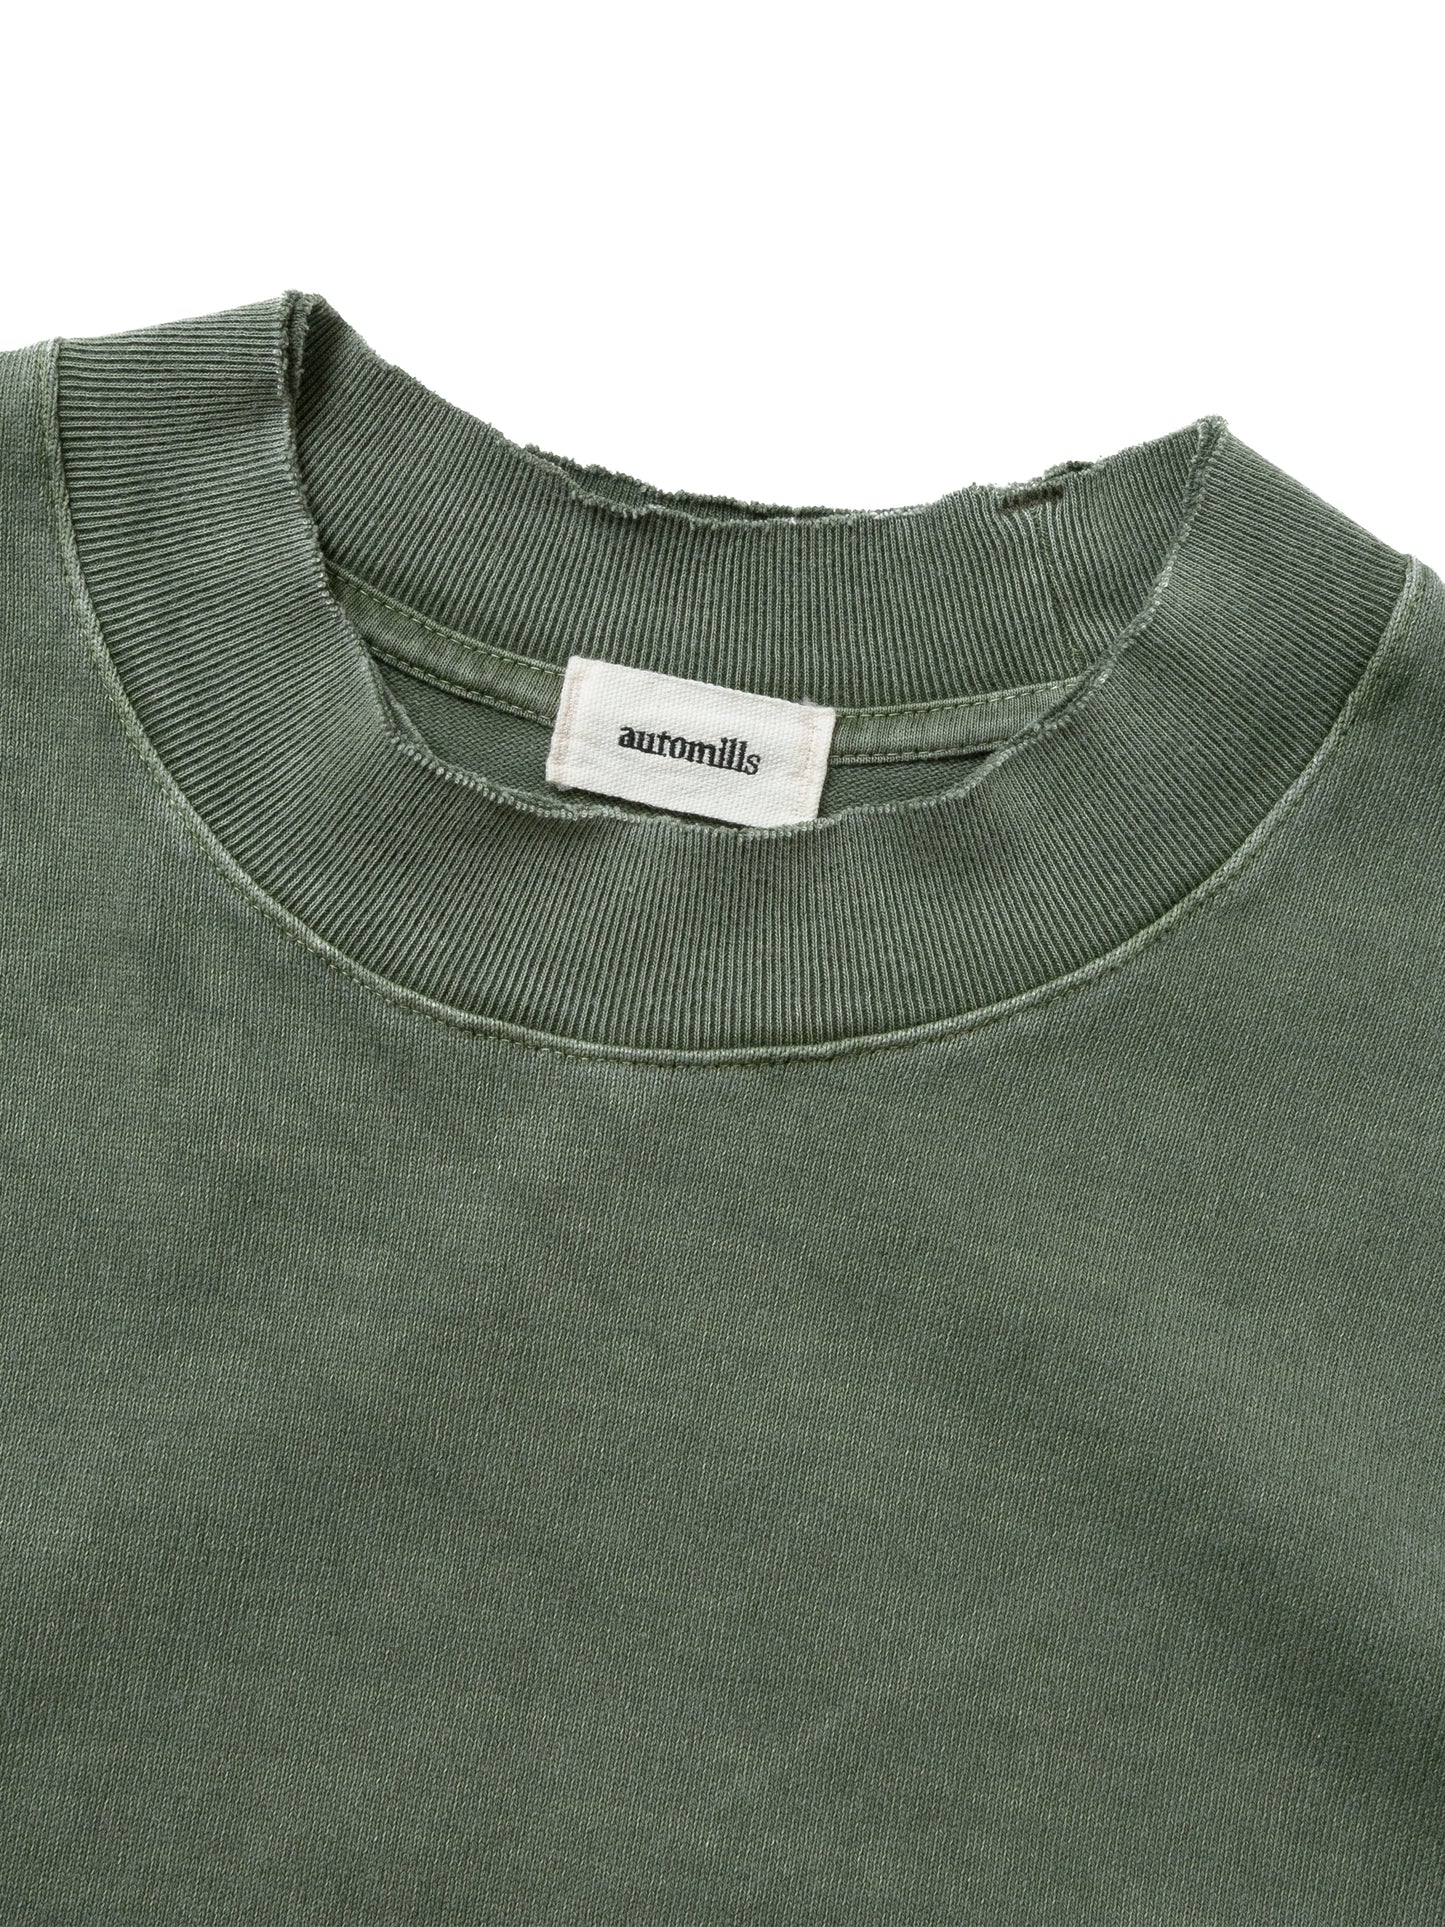 BAGGY L/S TEE COTTON JERSEY AM-C0108 Olive